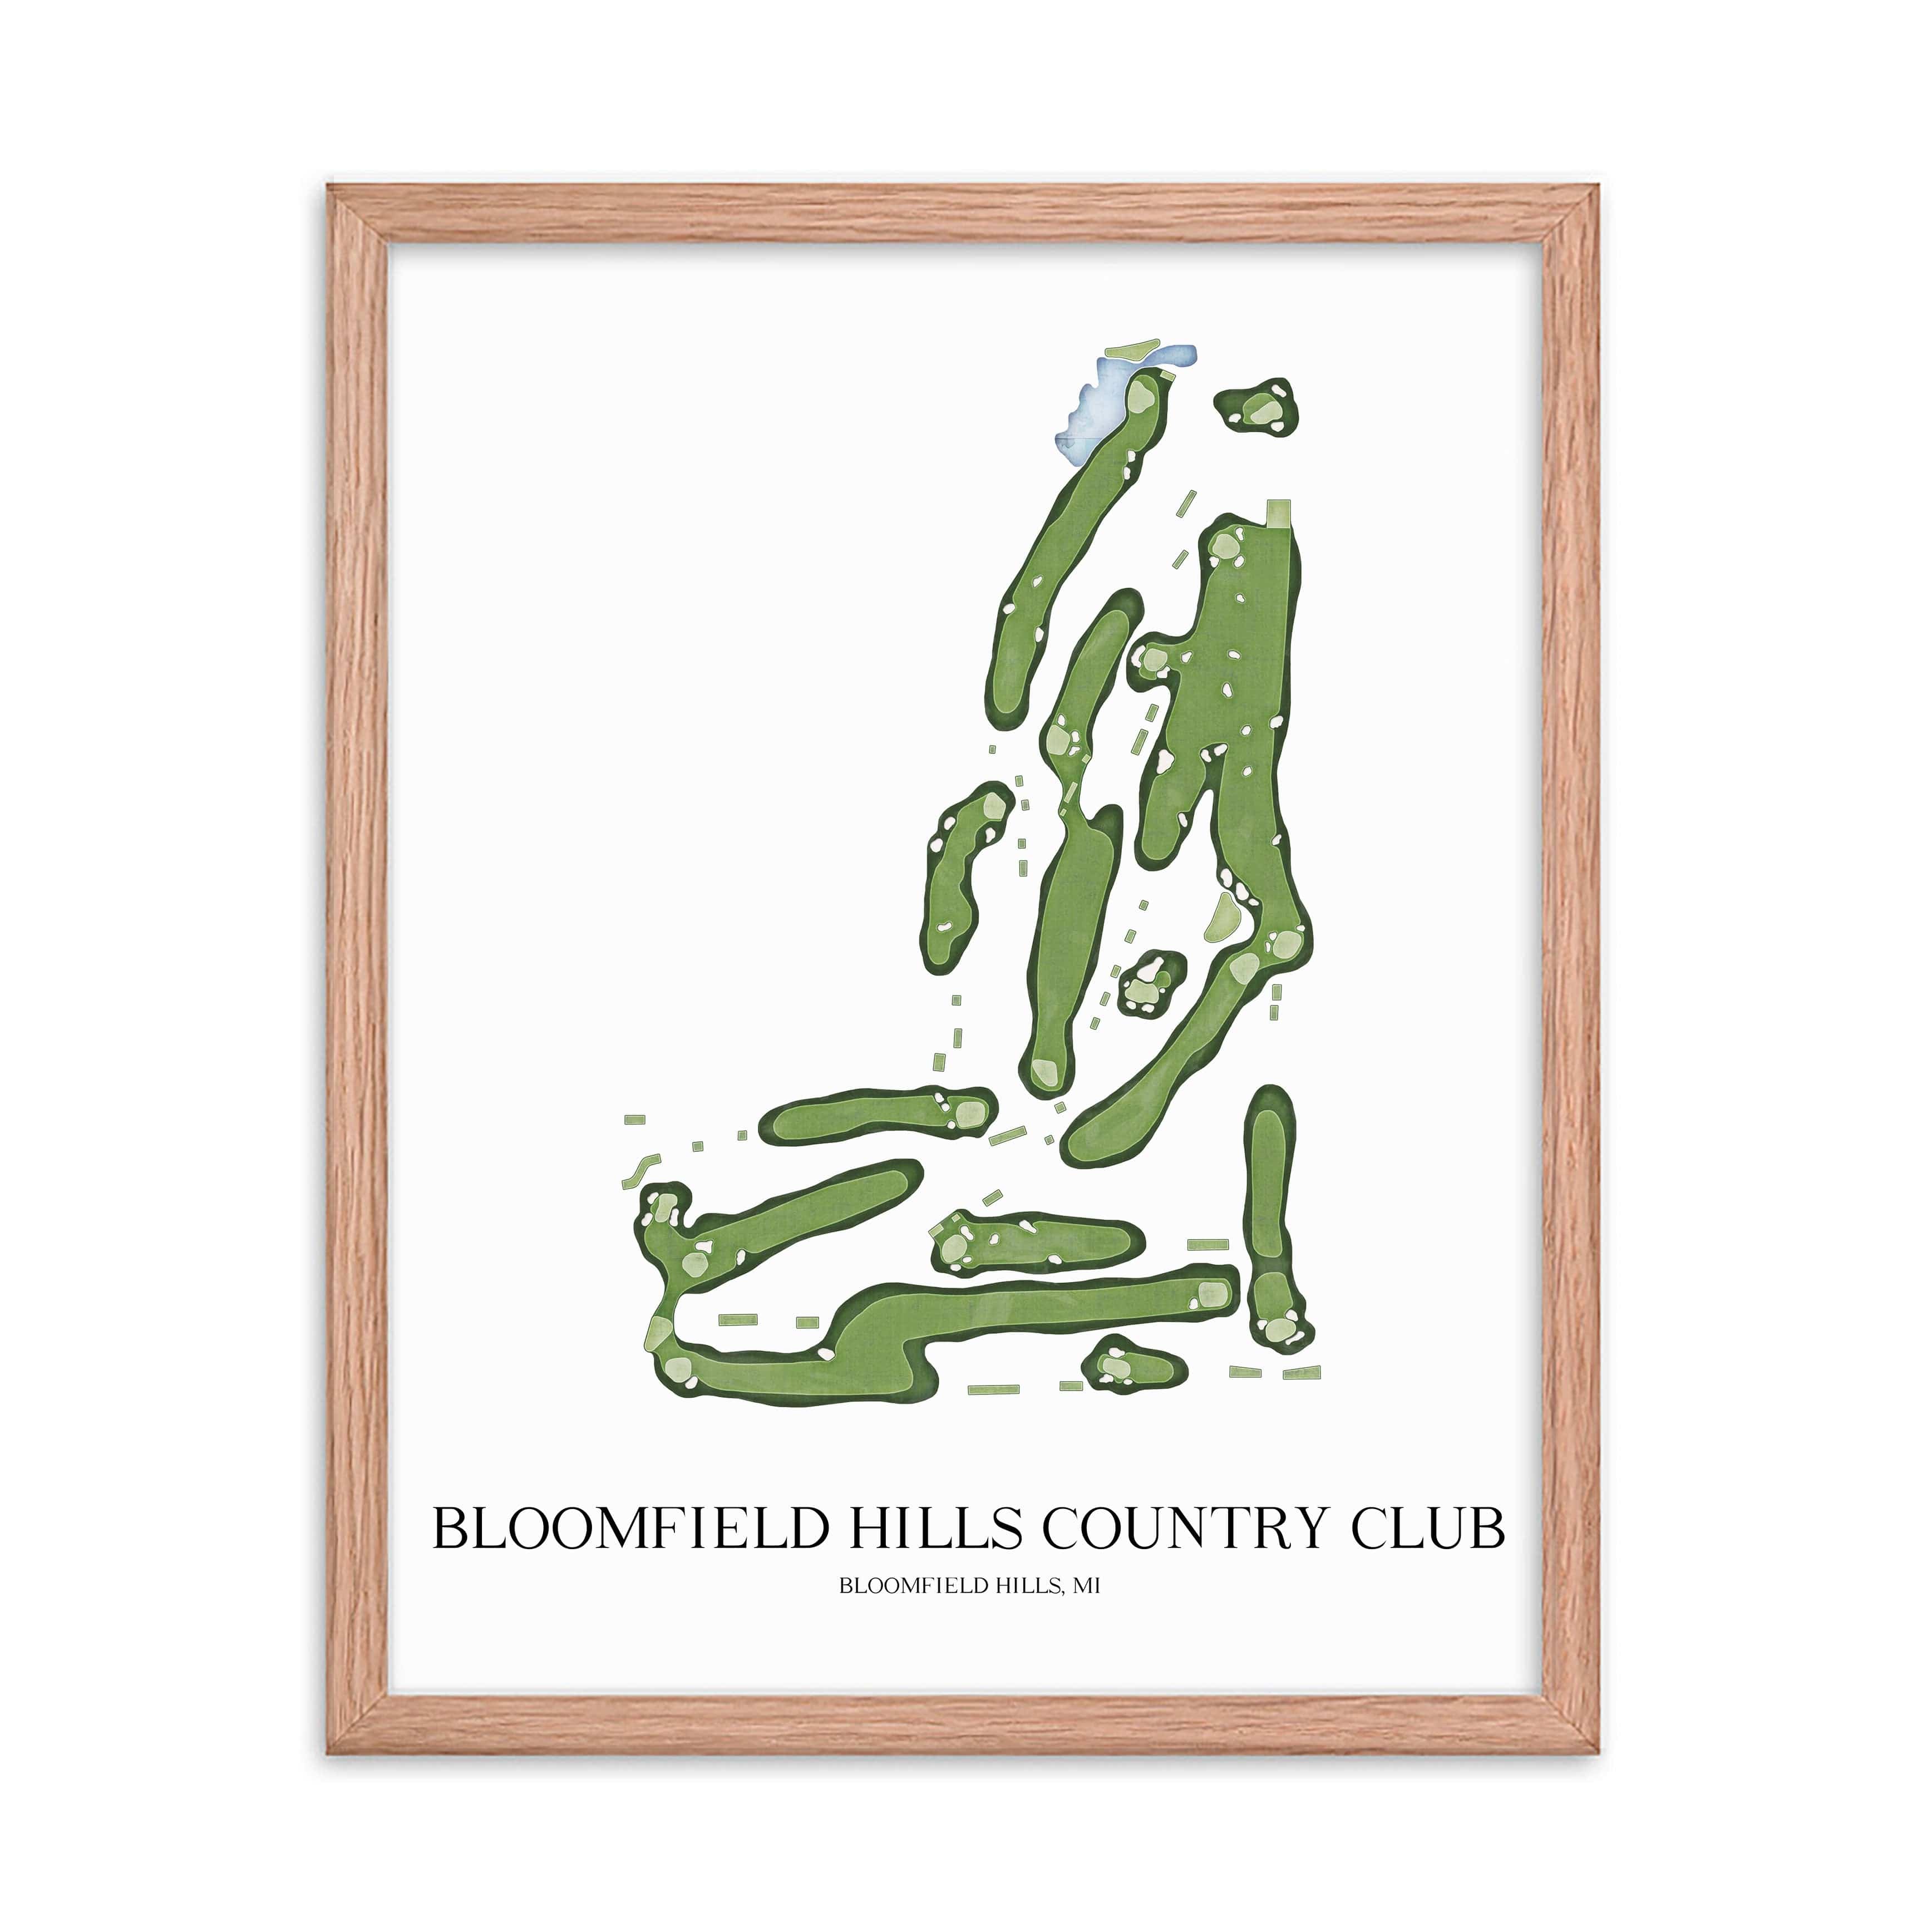 The 19th Hole Golf Shop - Golf Course Prints -  Bloomfield Hills Country Club Golf Course Map